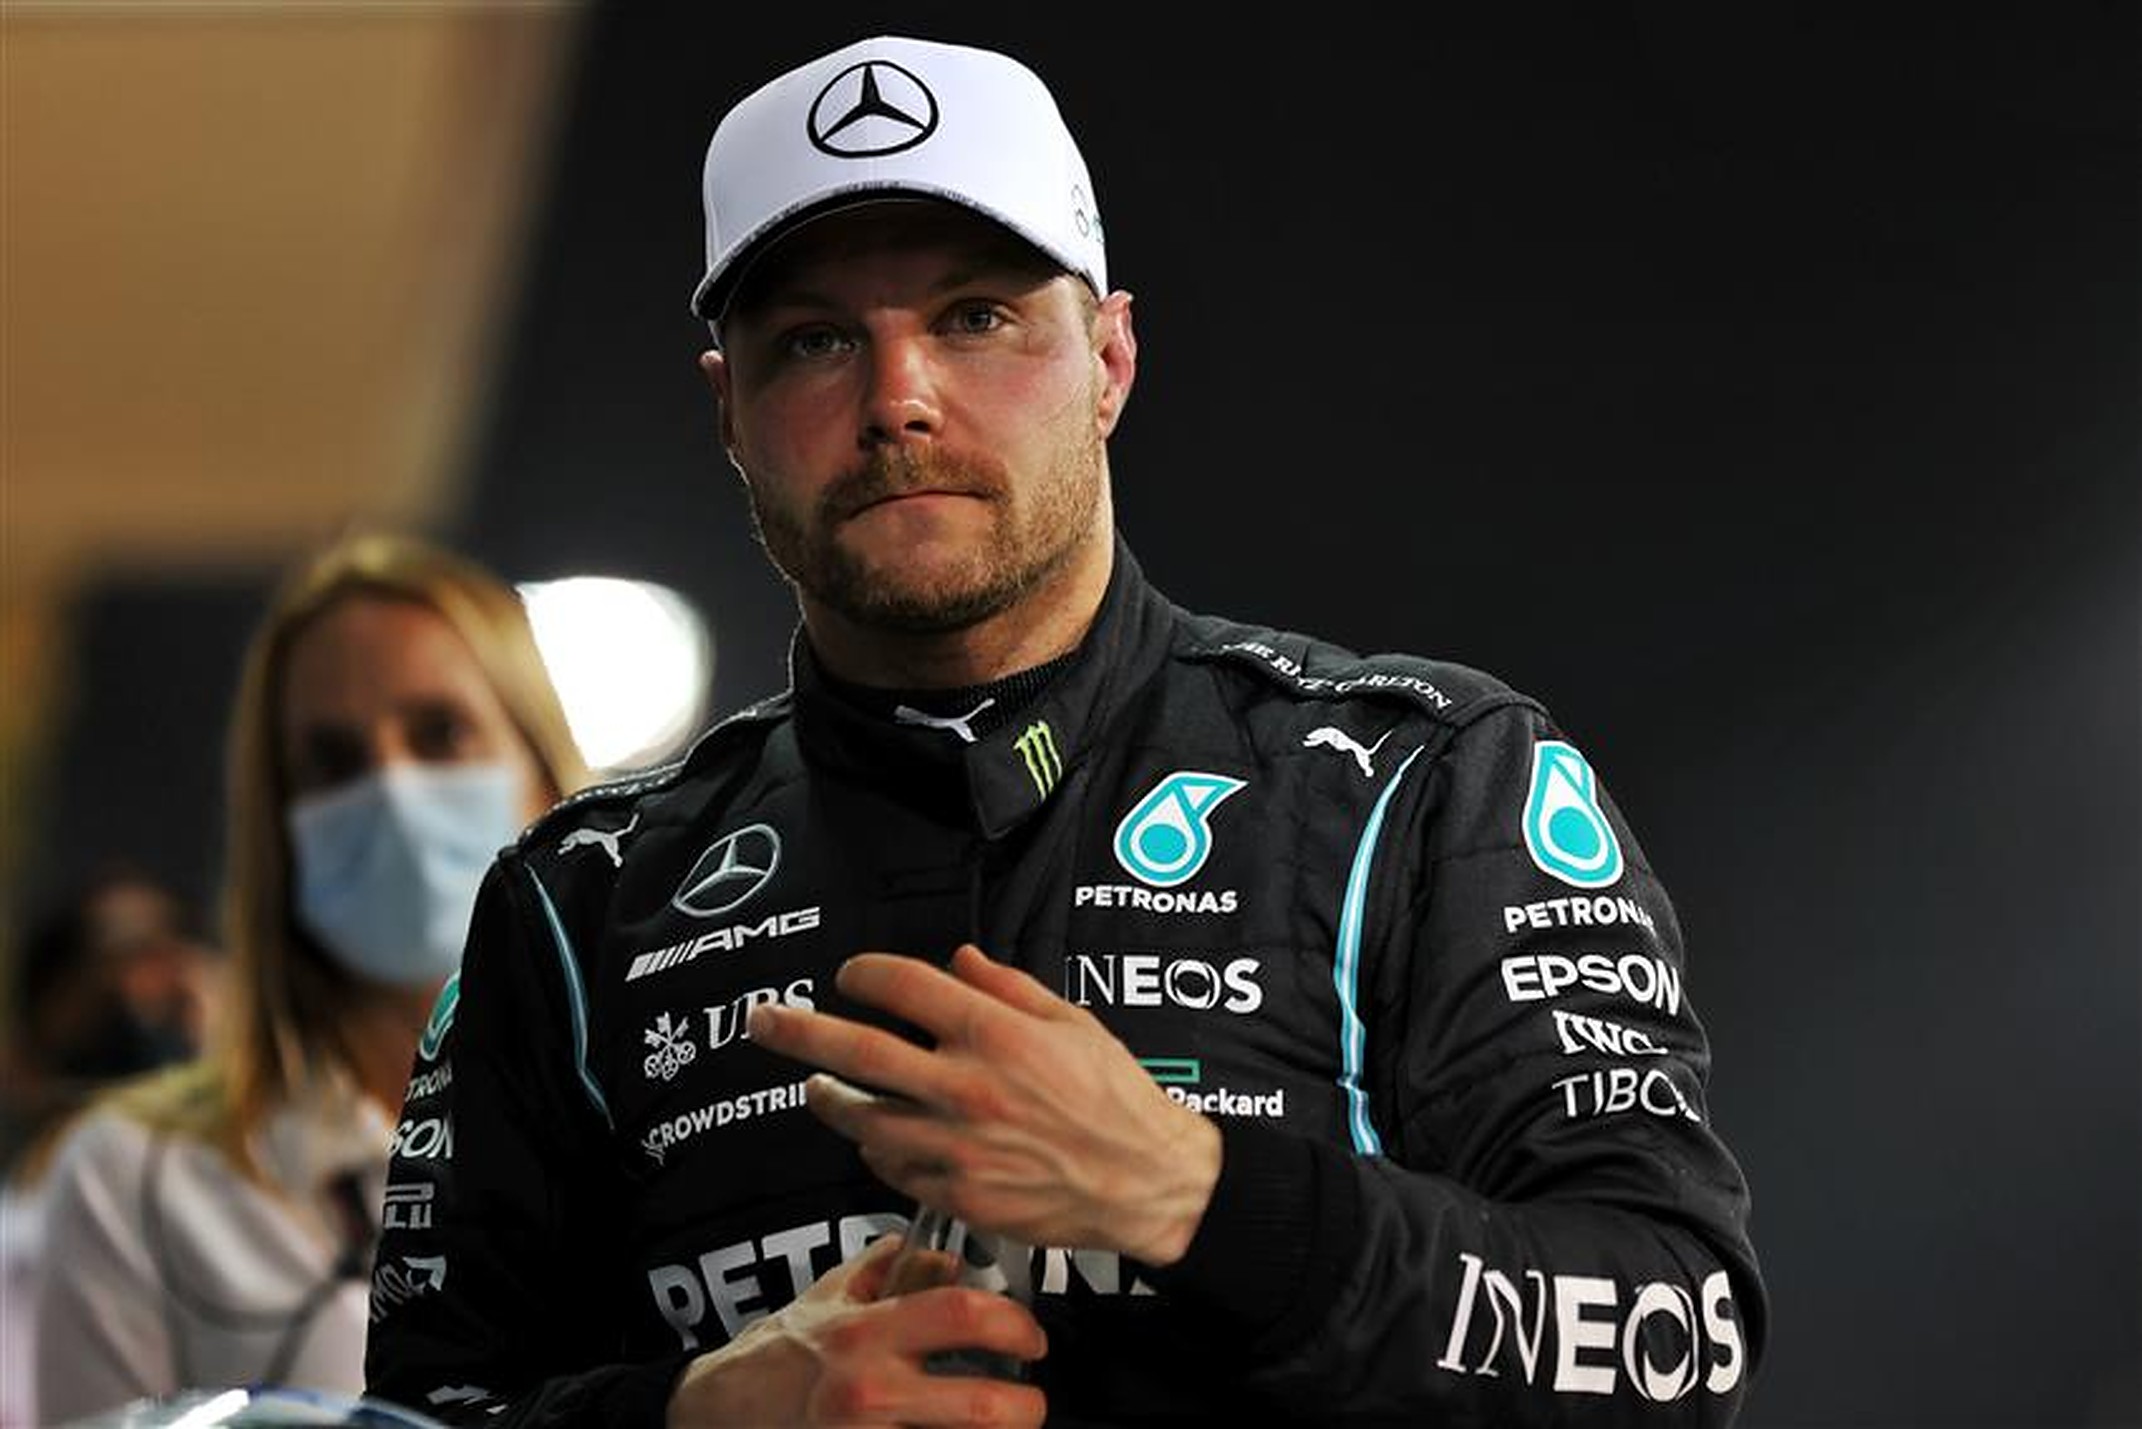 Bottas addresses rumours that he will be out of Mercedes after 2021, says it is not true